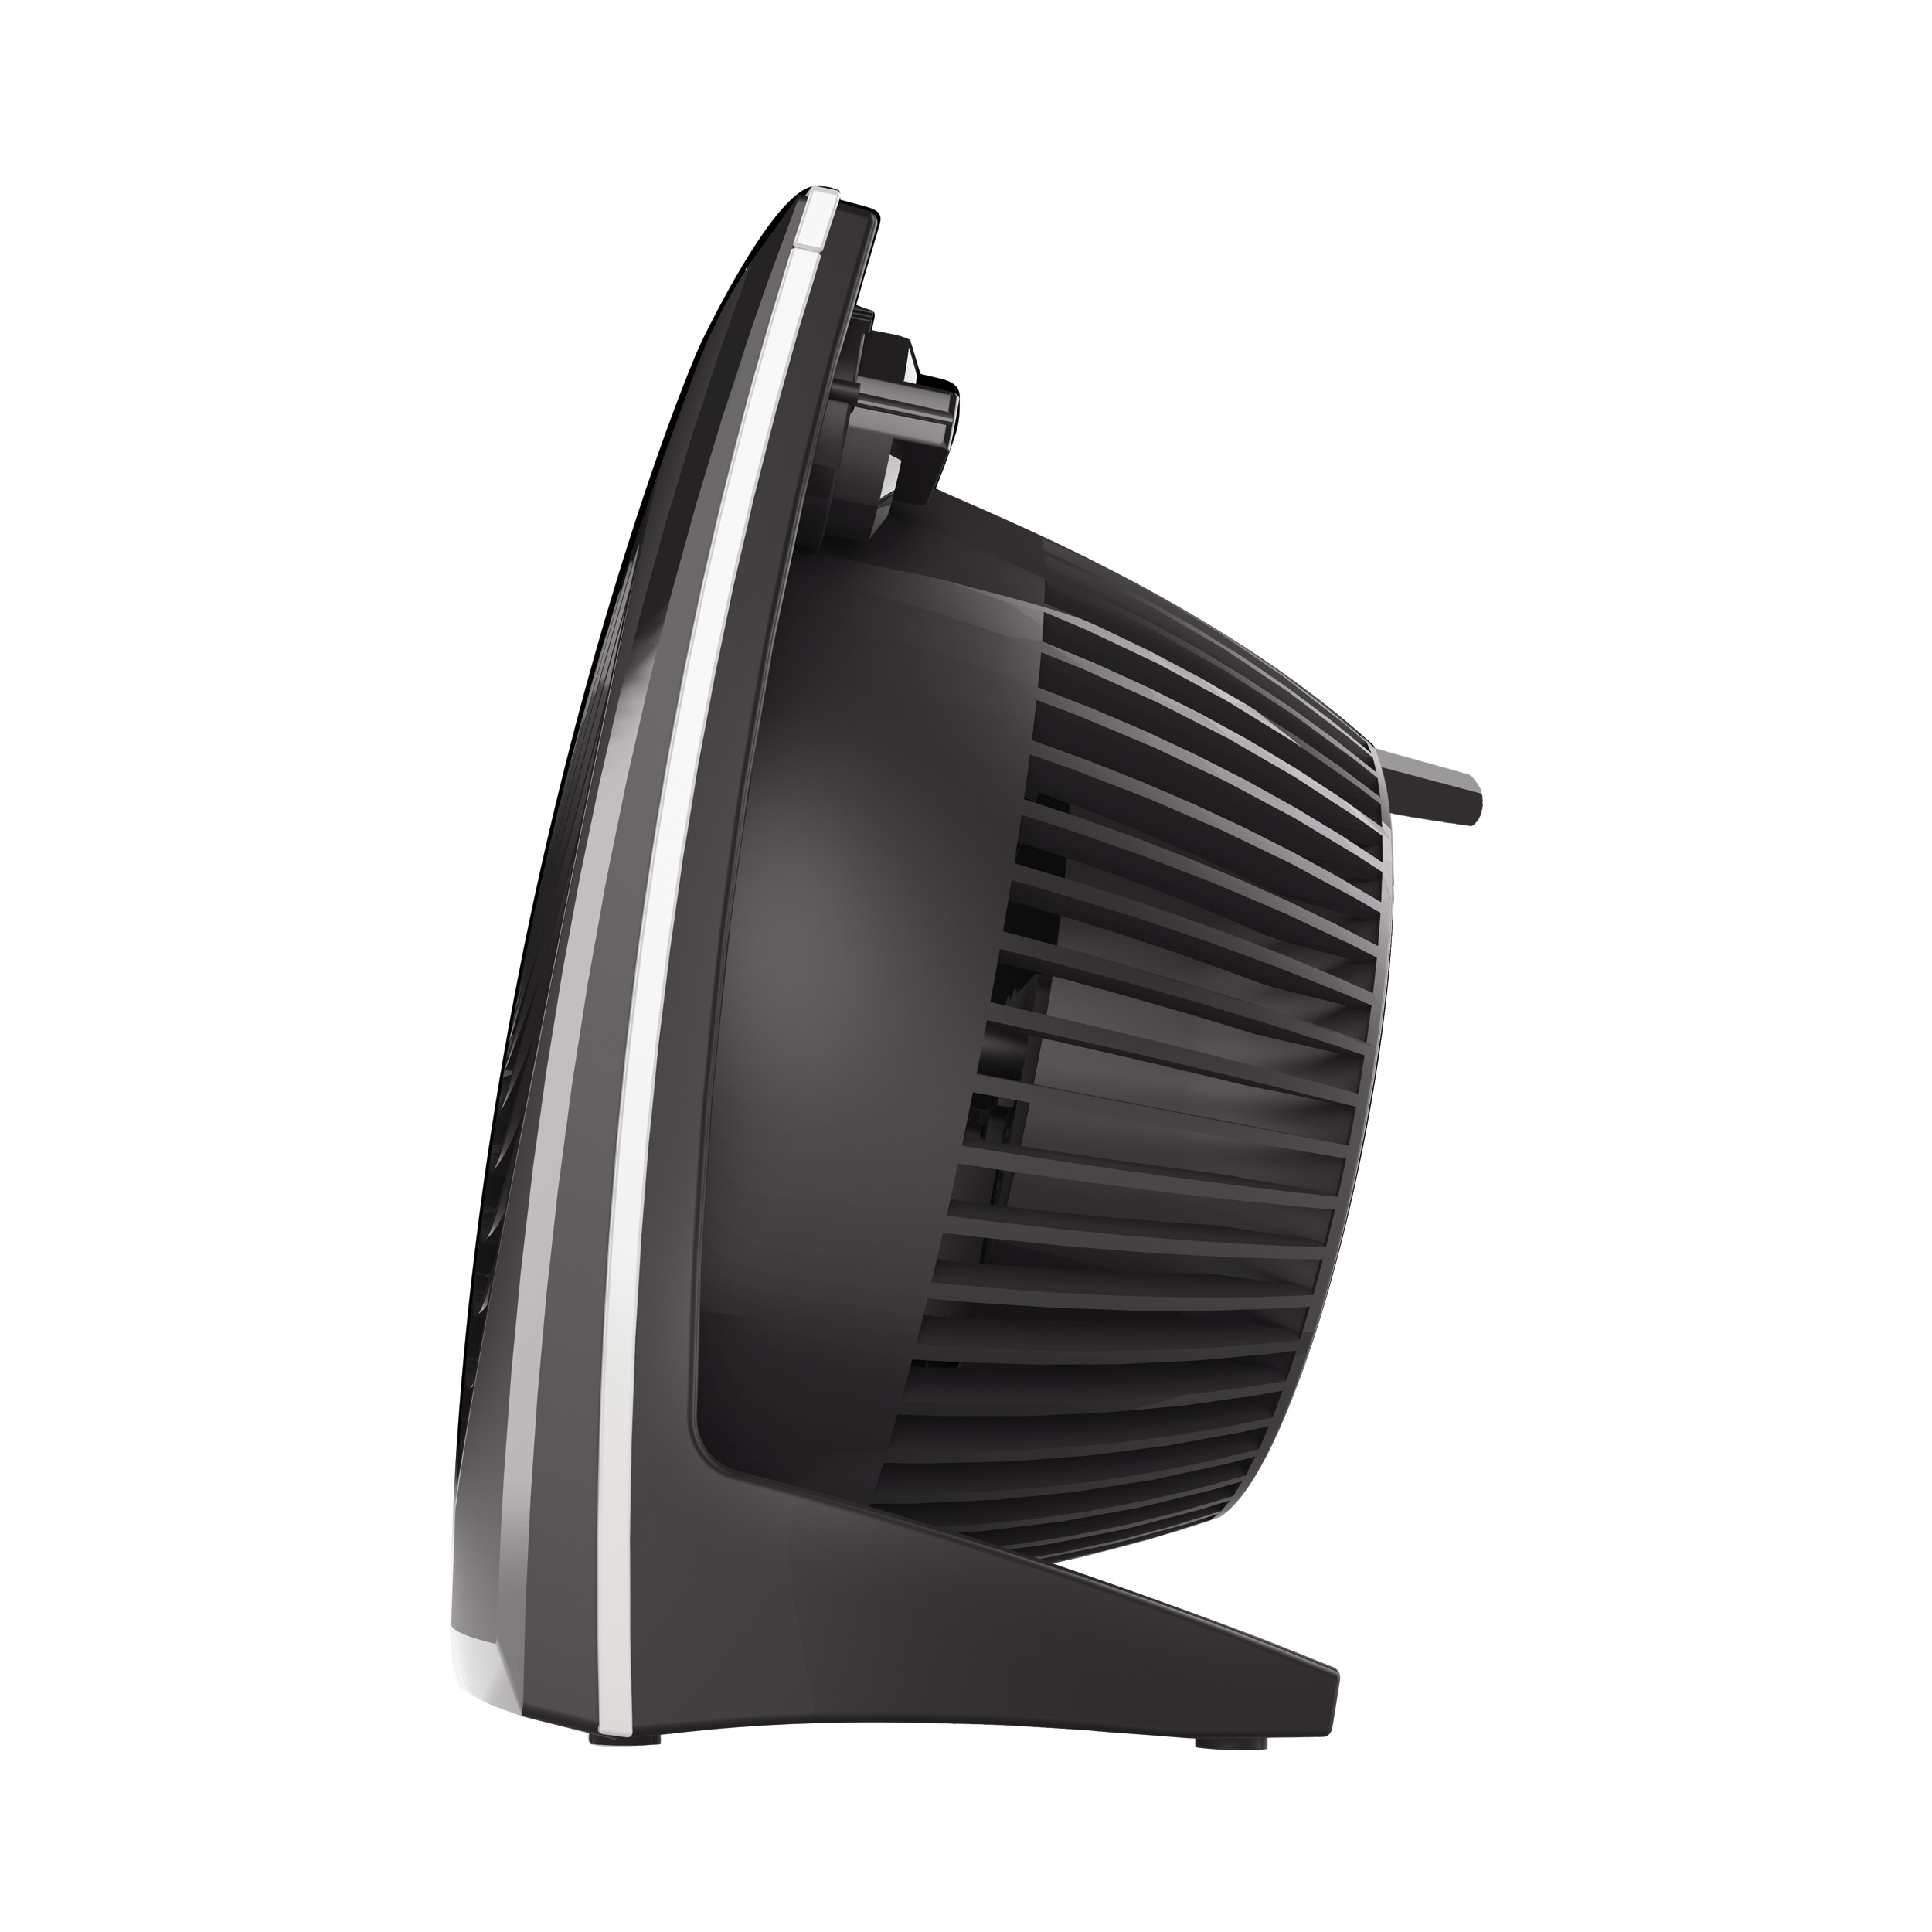 Vornado 573 Small Flat Compact Panel Whole Room Circulator Fan, 10" Height (New) - image 4 of 6